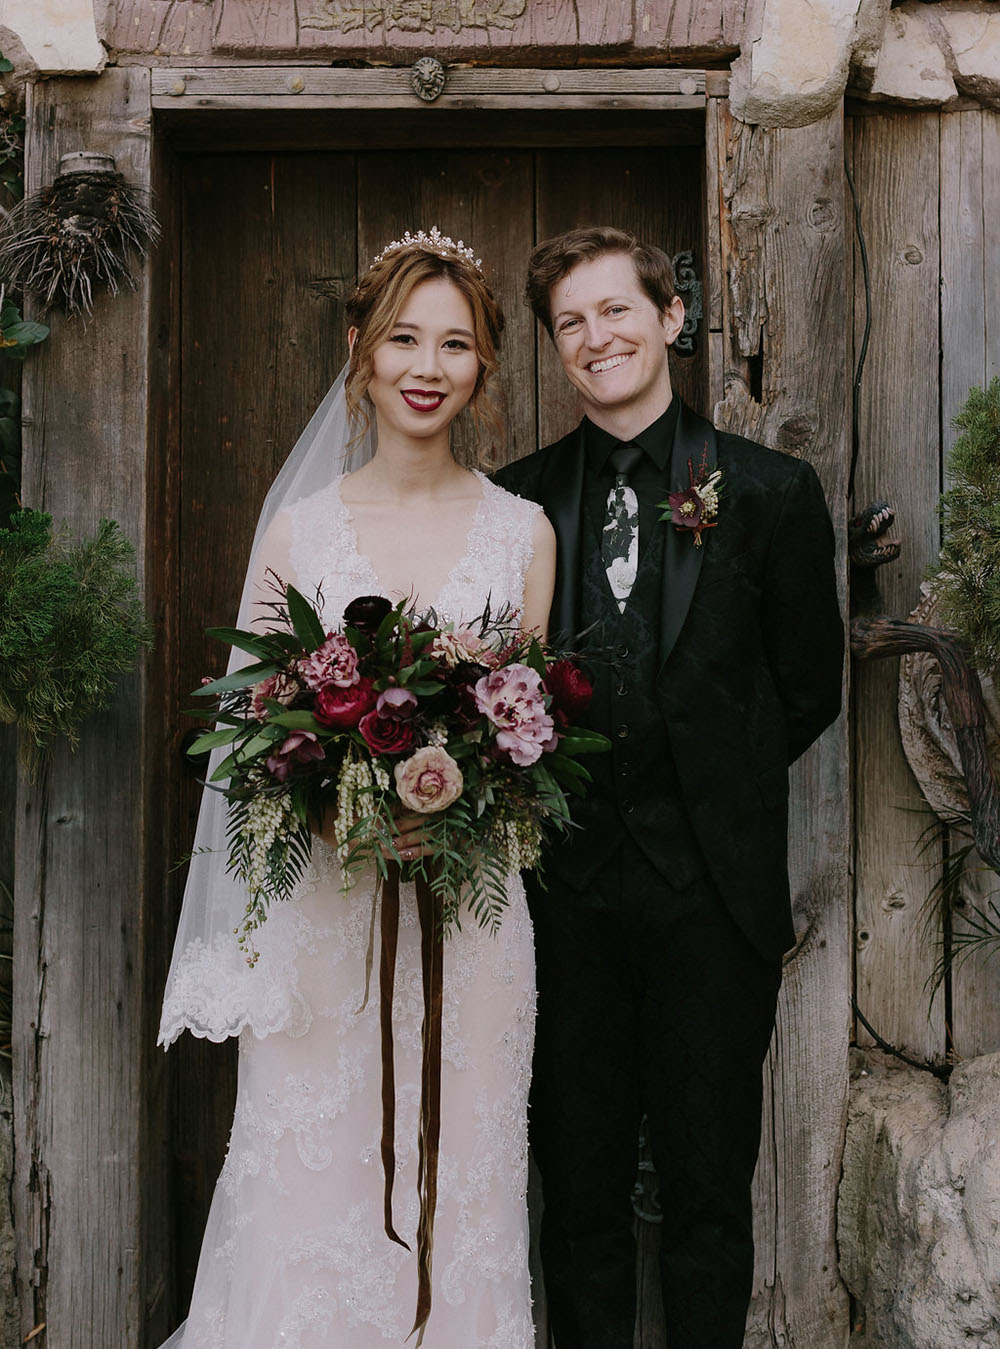 This couple is crazy about Harry Potter and they decided to choose it as the wedding theme